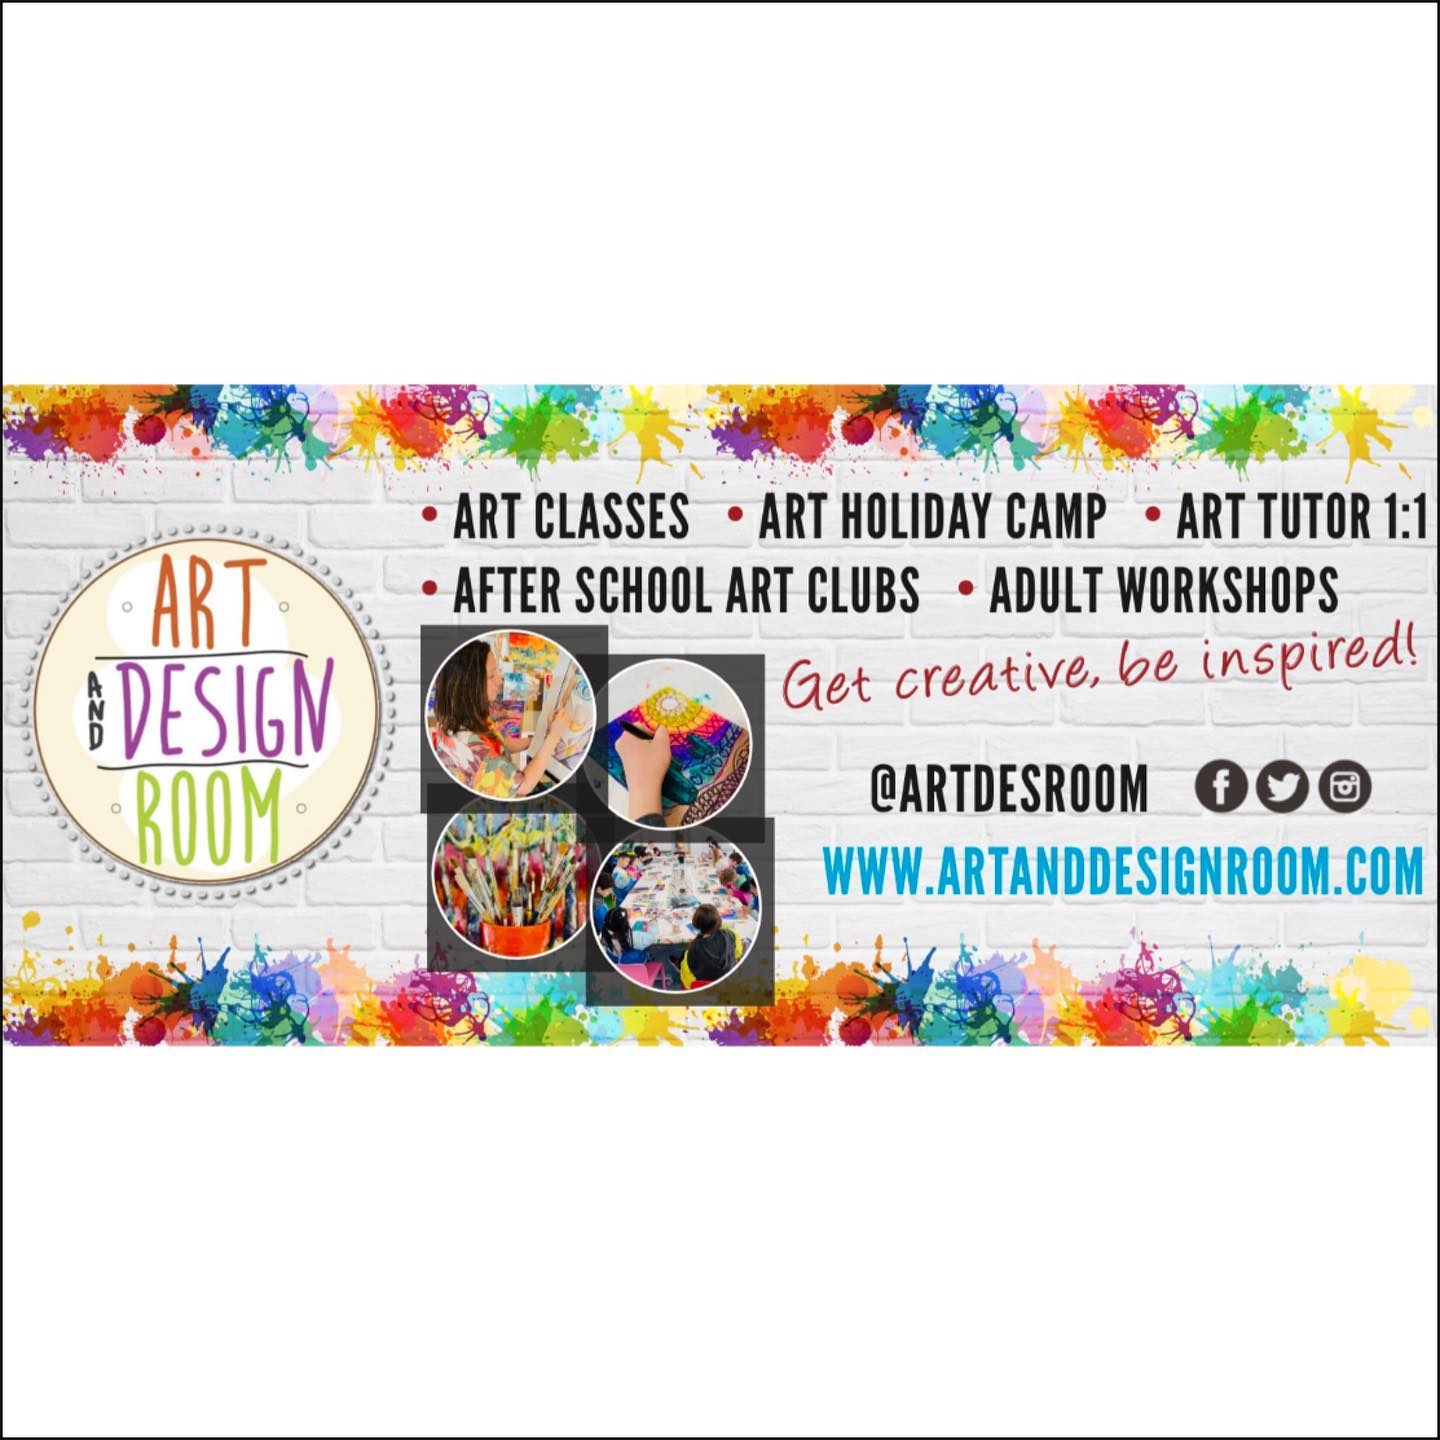 Art and Design Room - Express your Creativity